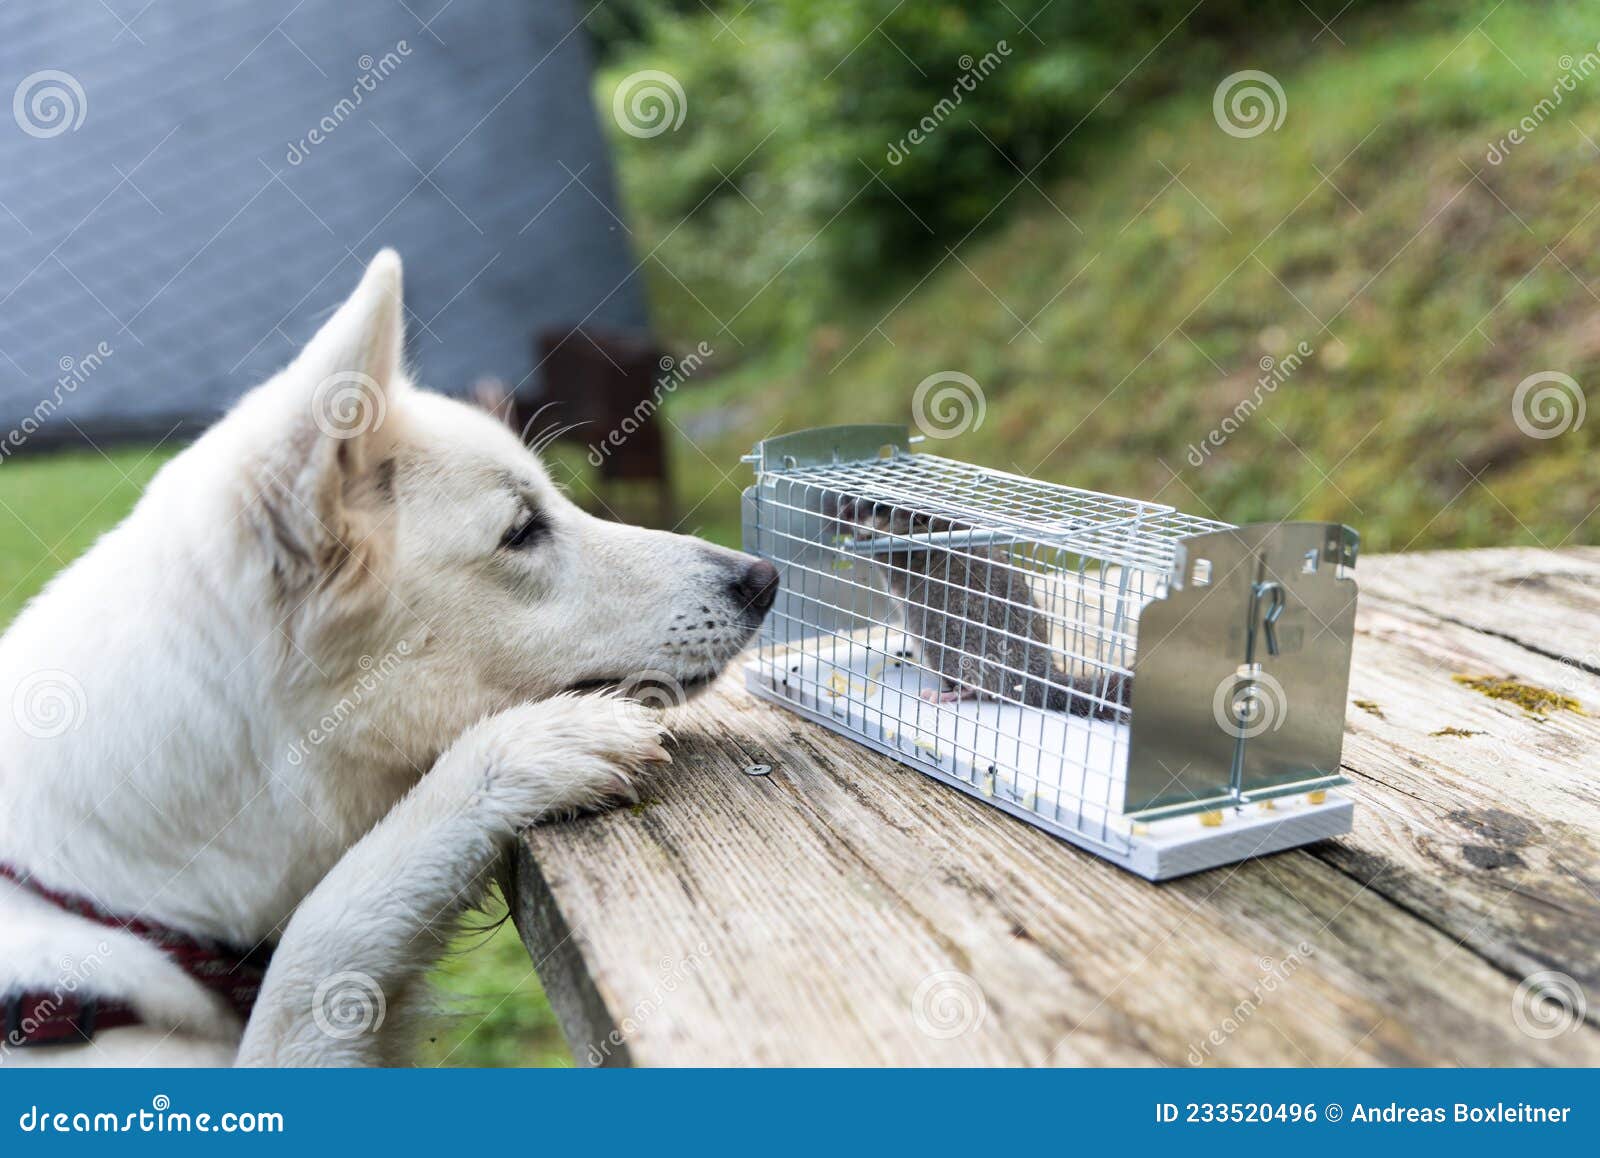 https://thumbs.dreamstime.com/z/trapped-dormouse-live-trap-watched-dog-trapped-dormouse-live-trap-233520496.jpg